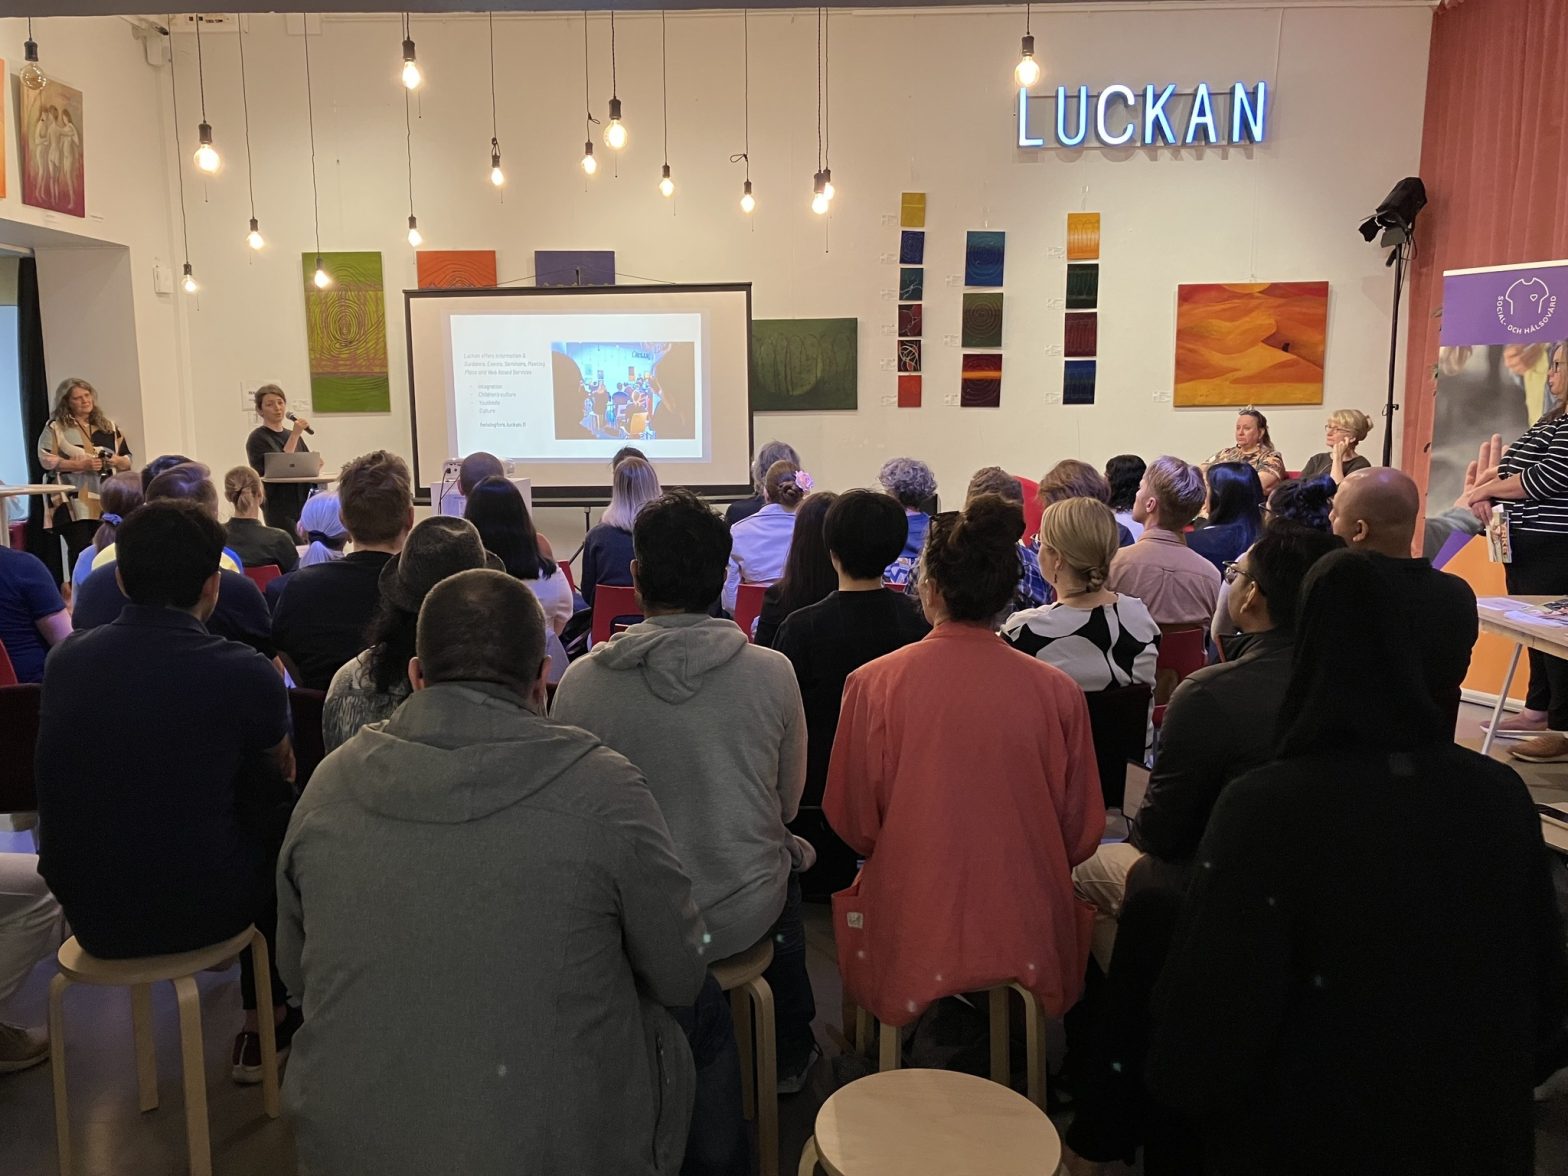 Luckan Integration’s Newsletter for May is here!